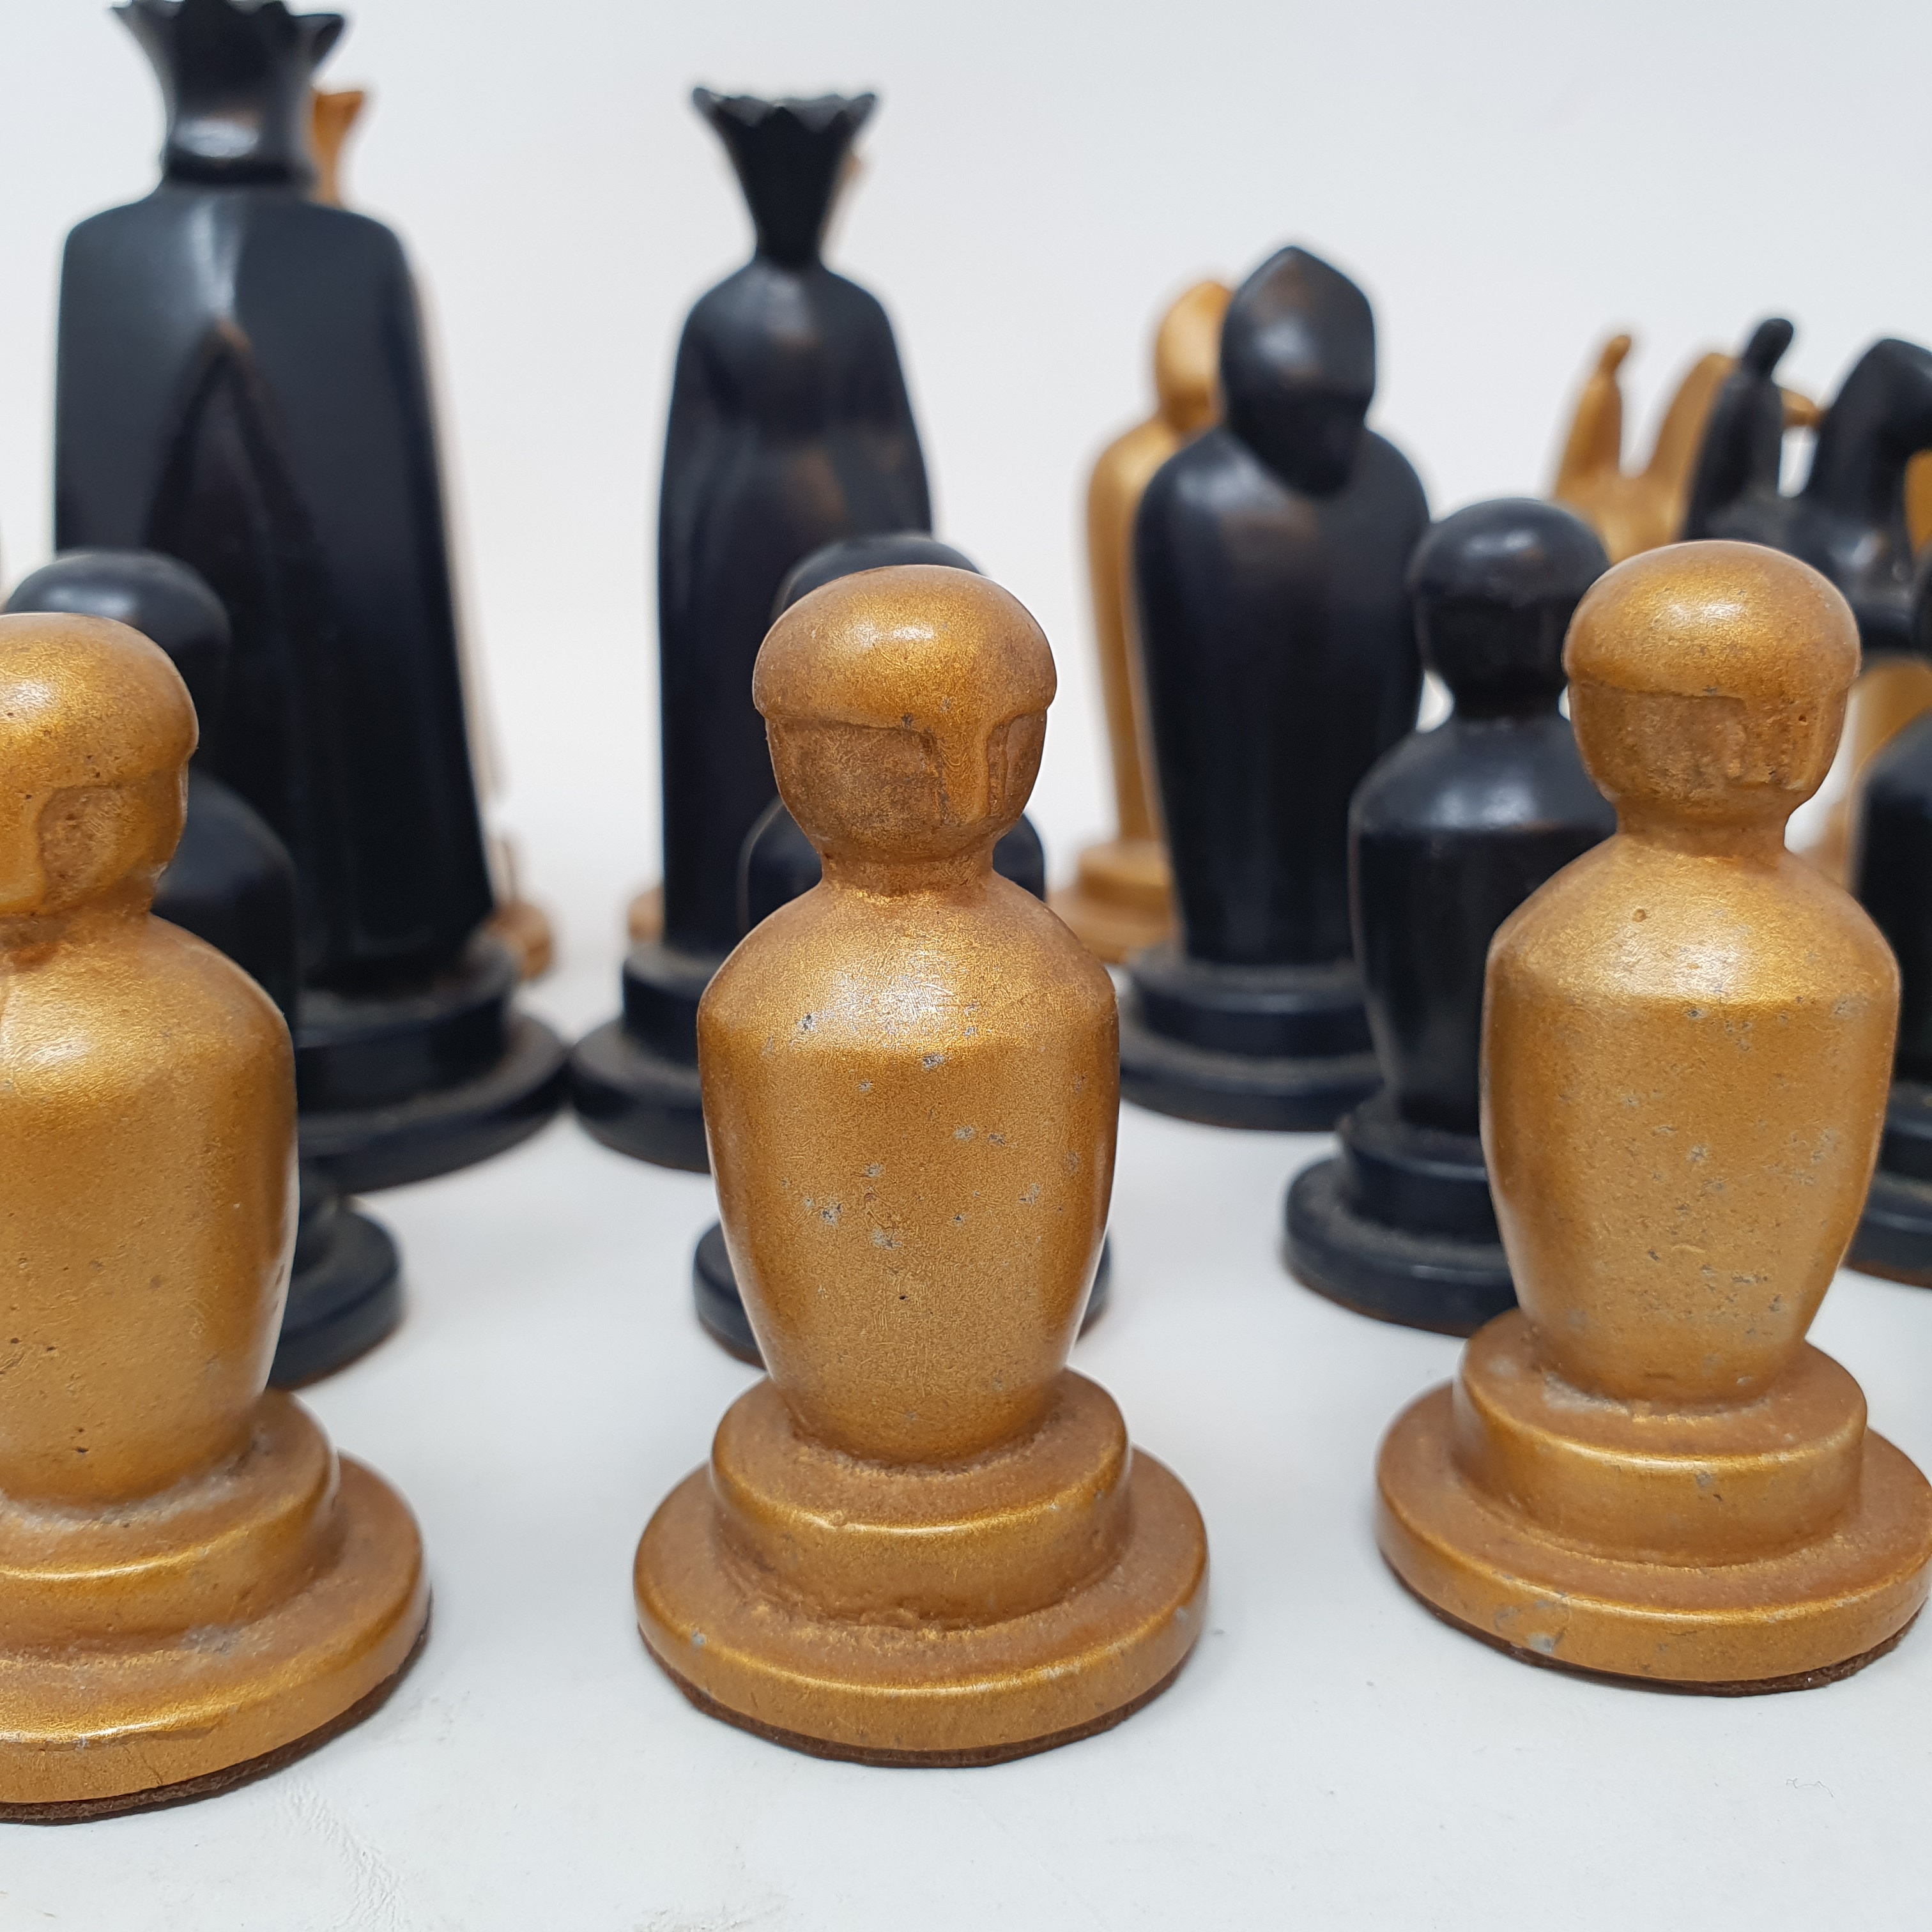 A Modernist chess set, by repute cast from aluminium/duralumin from a Spitfire, the king 8.5 cm high - Image 4 of 7